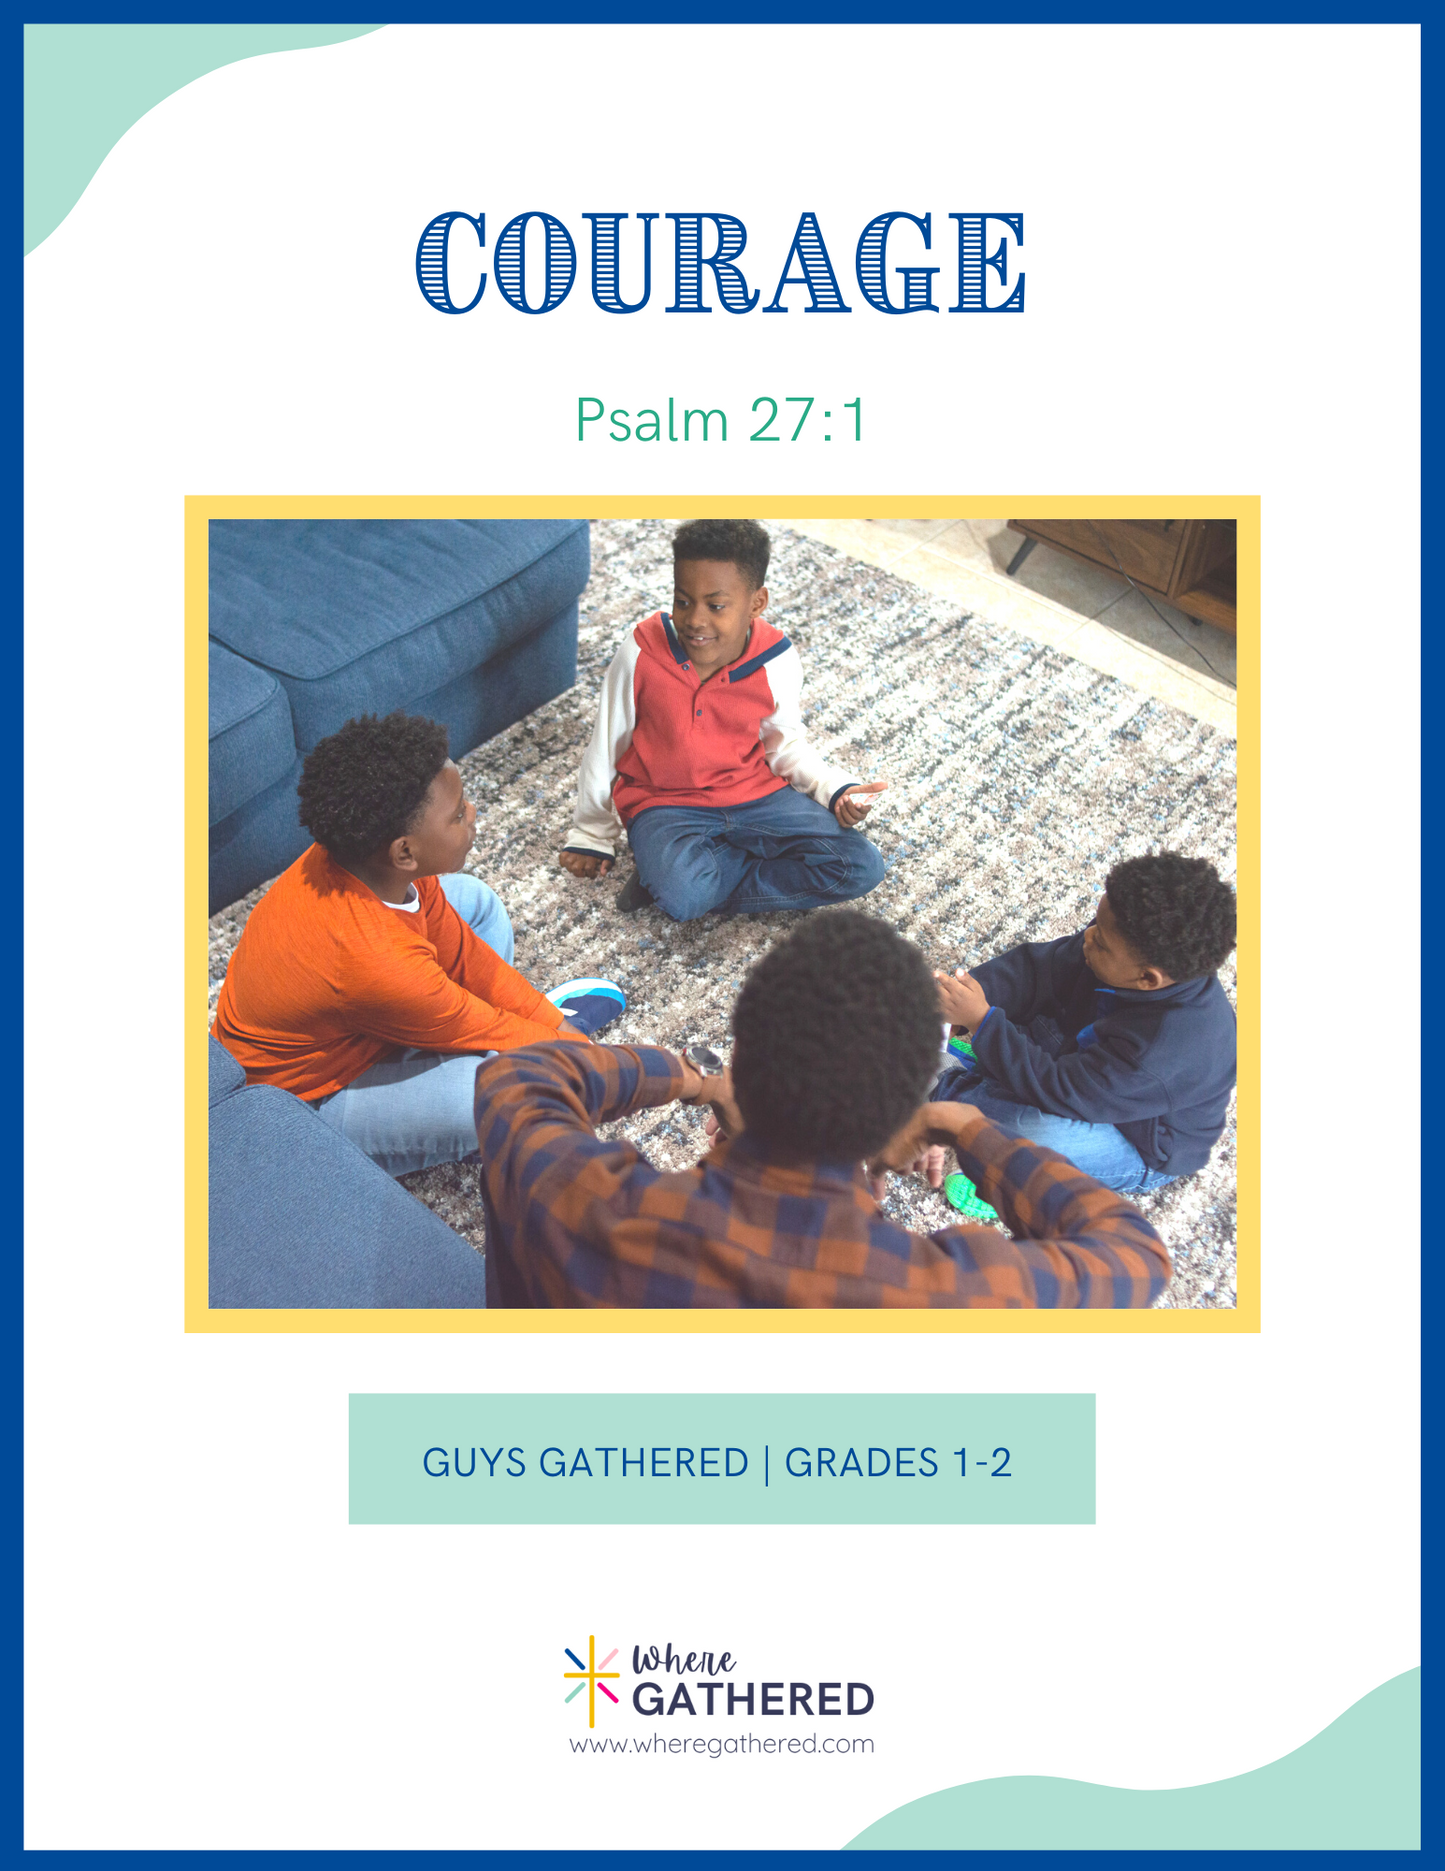 A cover of the Life Group Kit for kids Bible study lesson called Courage for boys.